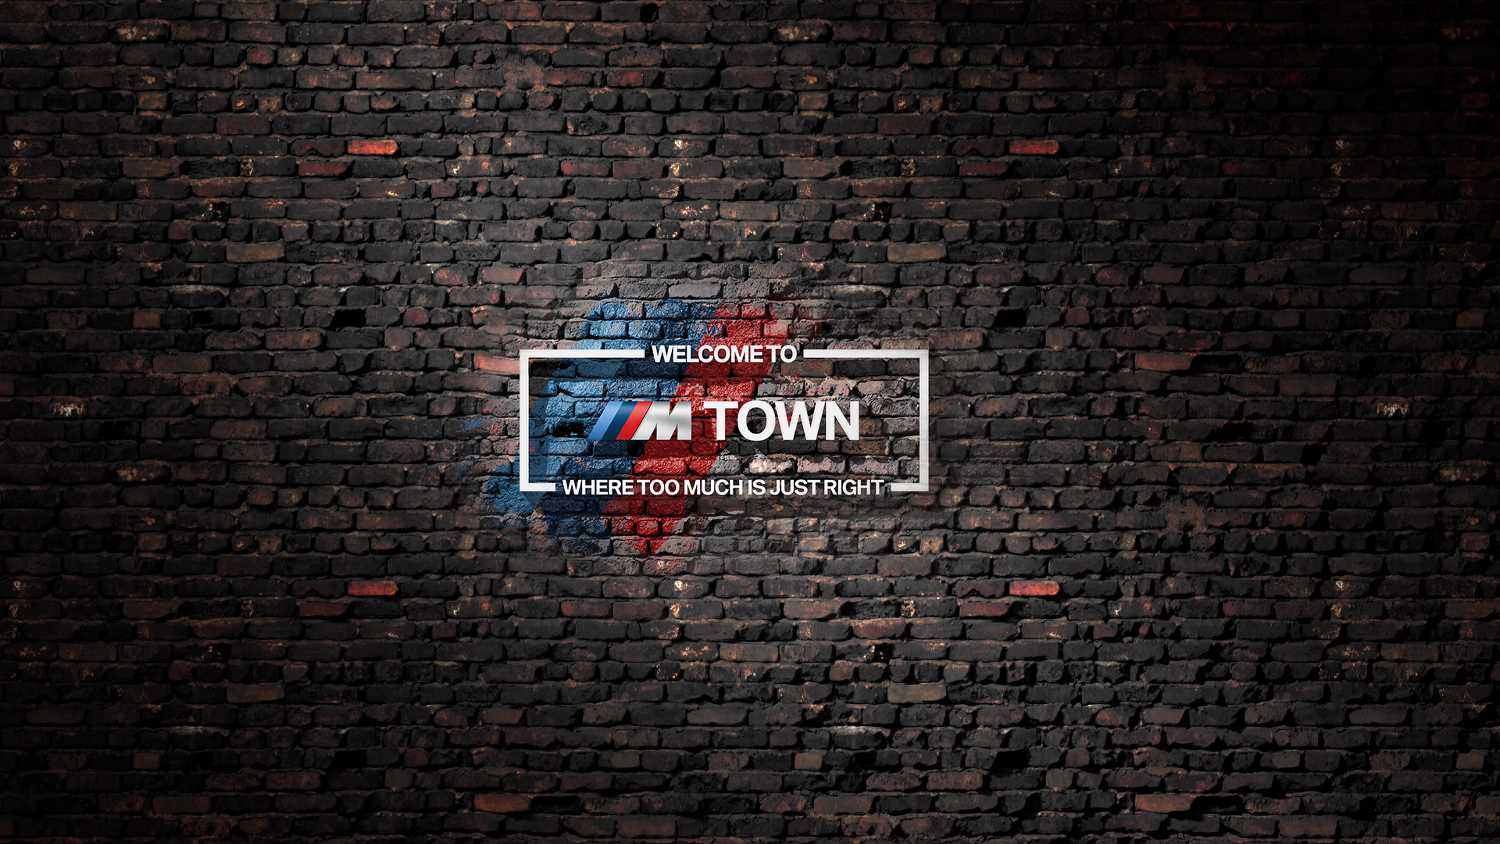 M Town” gives the feeling of high-performance enthusiasts a digital home.